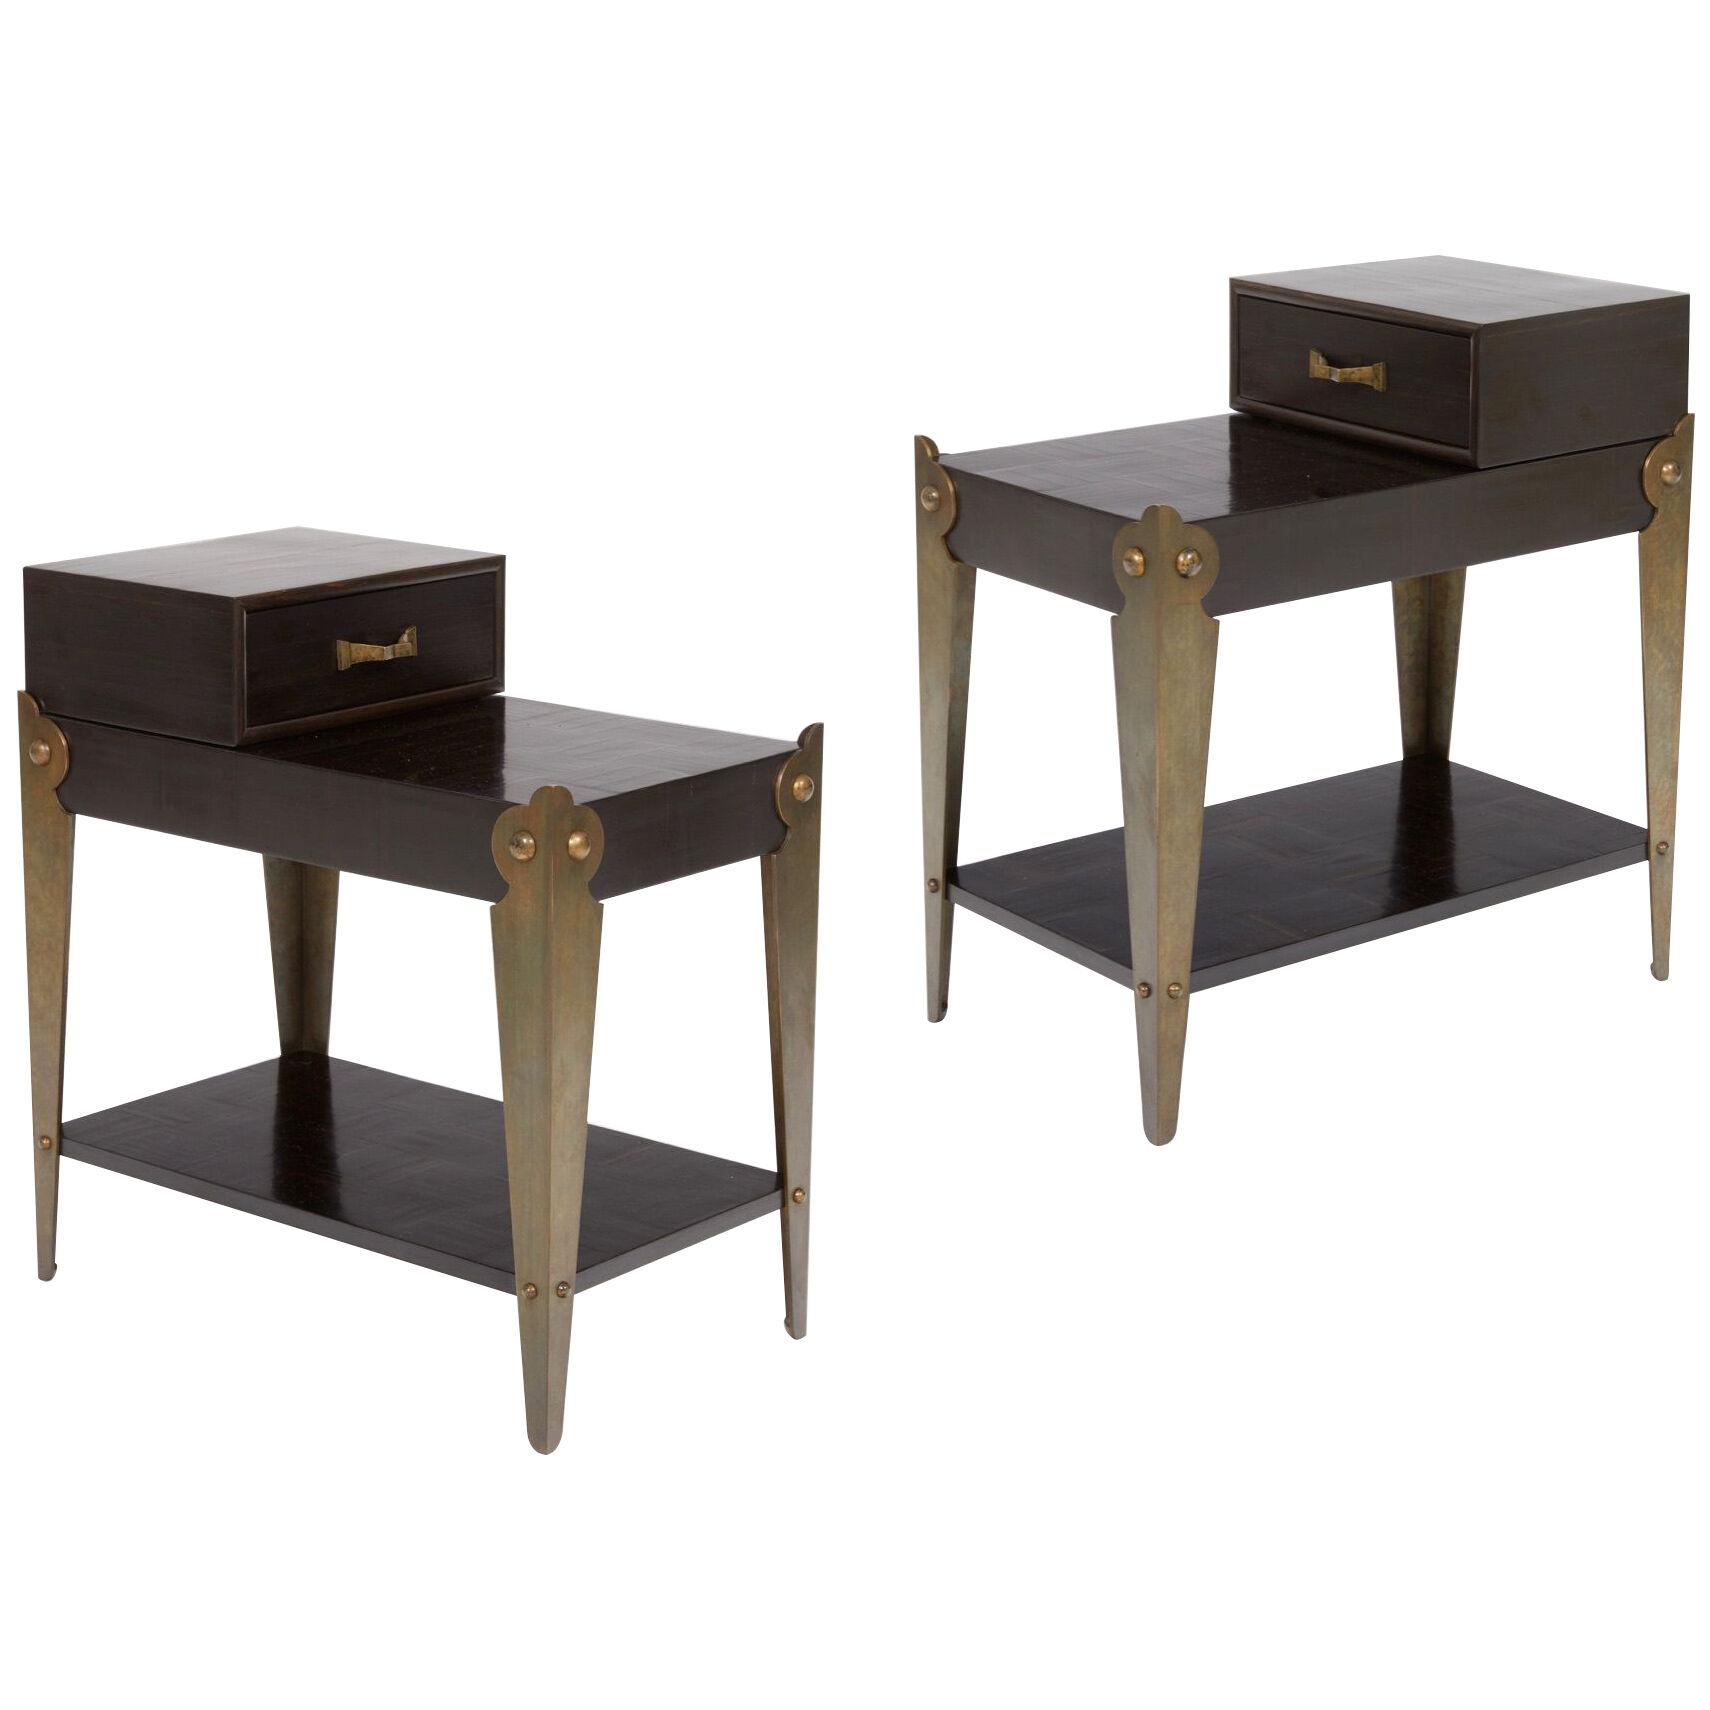 Pair of side Tables